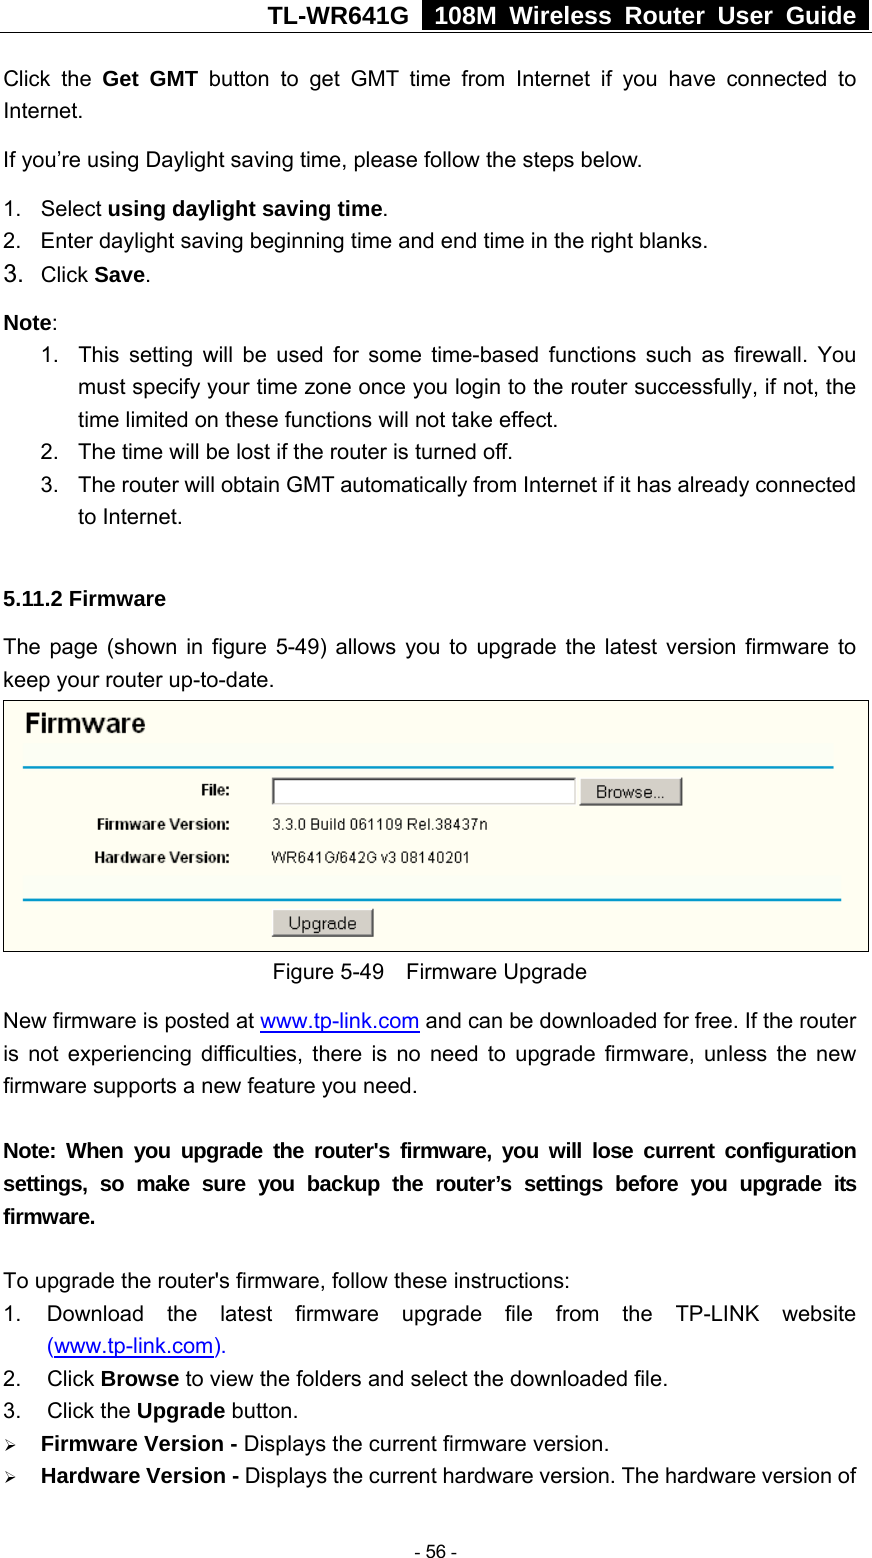 TL-WR641G   108M Wireless Router User Guide  Click the Get GMT button to get GMT time from Internet if you have connected to Internet.  If you’re using Daylight saving time, please follow the steps below. 1. Select using daylight saving time.  2.  Enter daylight saving beginning time and end time in the right blanks.   3.  Click Save.  Note:  1.  This setting will be used for some time-based functions such as firewall. You must specify your time zone once you login to the router successfully, if not, the time limited on these functions will not take effect.   2.  The time will be lost if the router is turned off.   3.  The router will obtain GMT automatically from Internet if it has already connected to Internet.  5.11.2 Firmware The page (shown in figure 5-49) allows you to upgrade the latest version firmware to keep your router up-to-date.  Figure 5-49  Firmware Upgrade New firmware is posted at www.tp-link.com and can be downloaded for free. If the router is not experiencing difficulties, there is no need to upgrade firmware, unless the new firmware supports a new feature you need.  Note: When you upgrade the router&apos;s firmware, you will lose current configuration settings, so make sure you backup the router’s settings before you upgrade its firmware.  To upgrade the router&apos;s firmware, follow these instructions: 1.  Download the latest firmware upgrade file from the TP-LINK website (www.tp-link.com).  2. Click Browse to view the folders and select the downloaded file.   3. Click the Upgrade button.   ¾ Firmware Version - Displays the current firmware version. ¾ Hardware Version - Displays the current hardware version. The hardware version of  - 56 - 